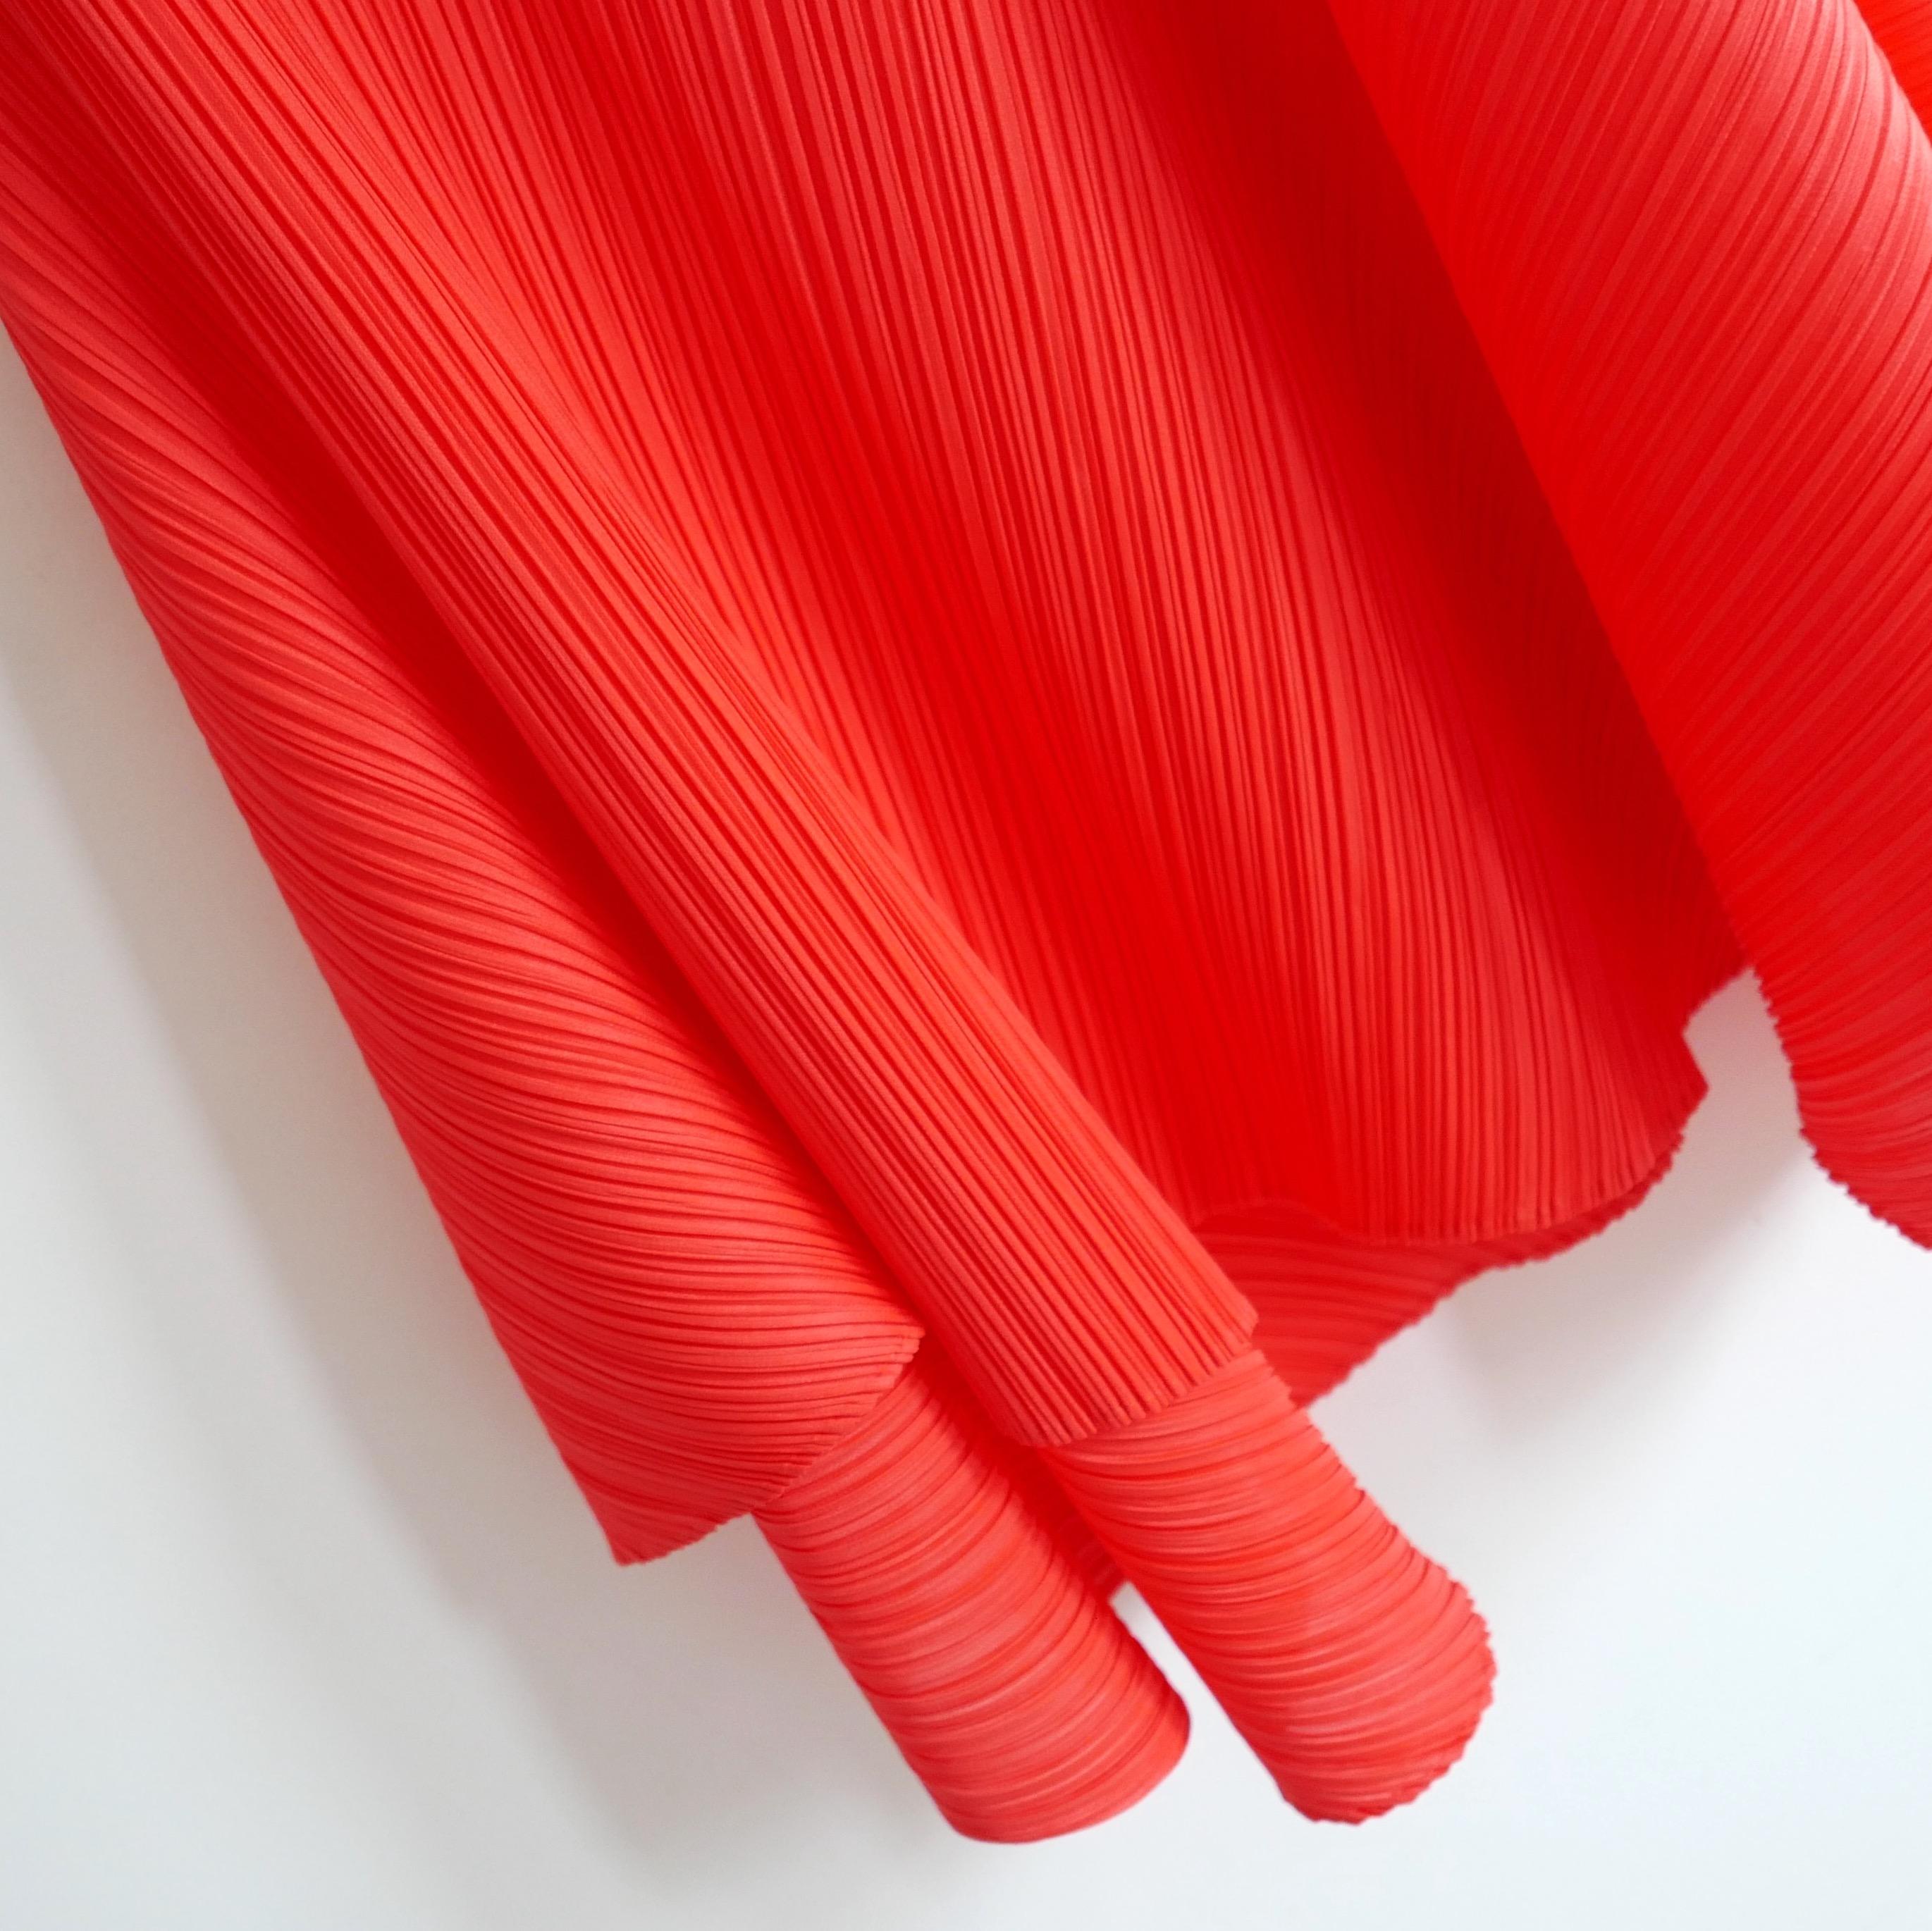 Absolutely gorgeous Issey Miyake Pleats Please dress. From the Spring 2018 collection. Worn a couple of times. Made from lightweight signature pleated polyester in a rich, bright orange colour. It has a super sculptural asymmetric panelled cut with